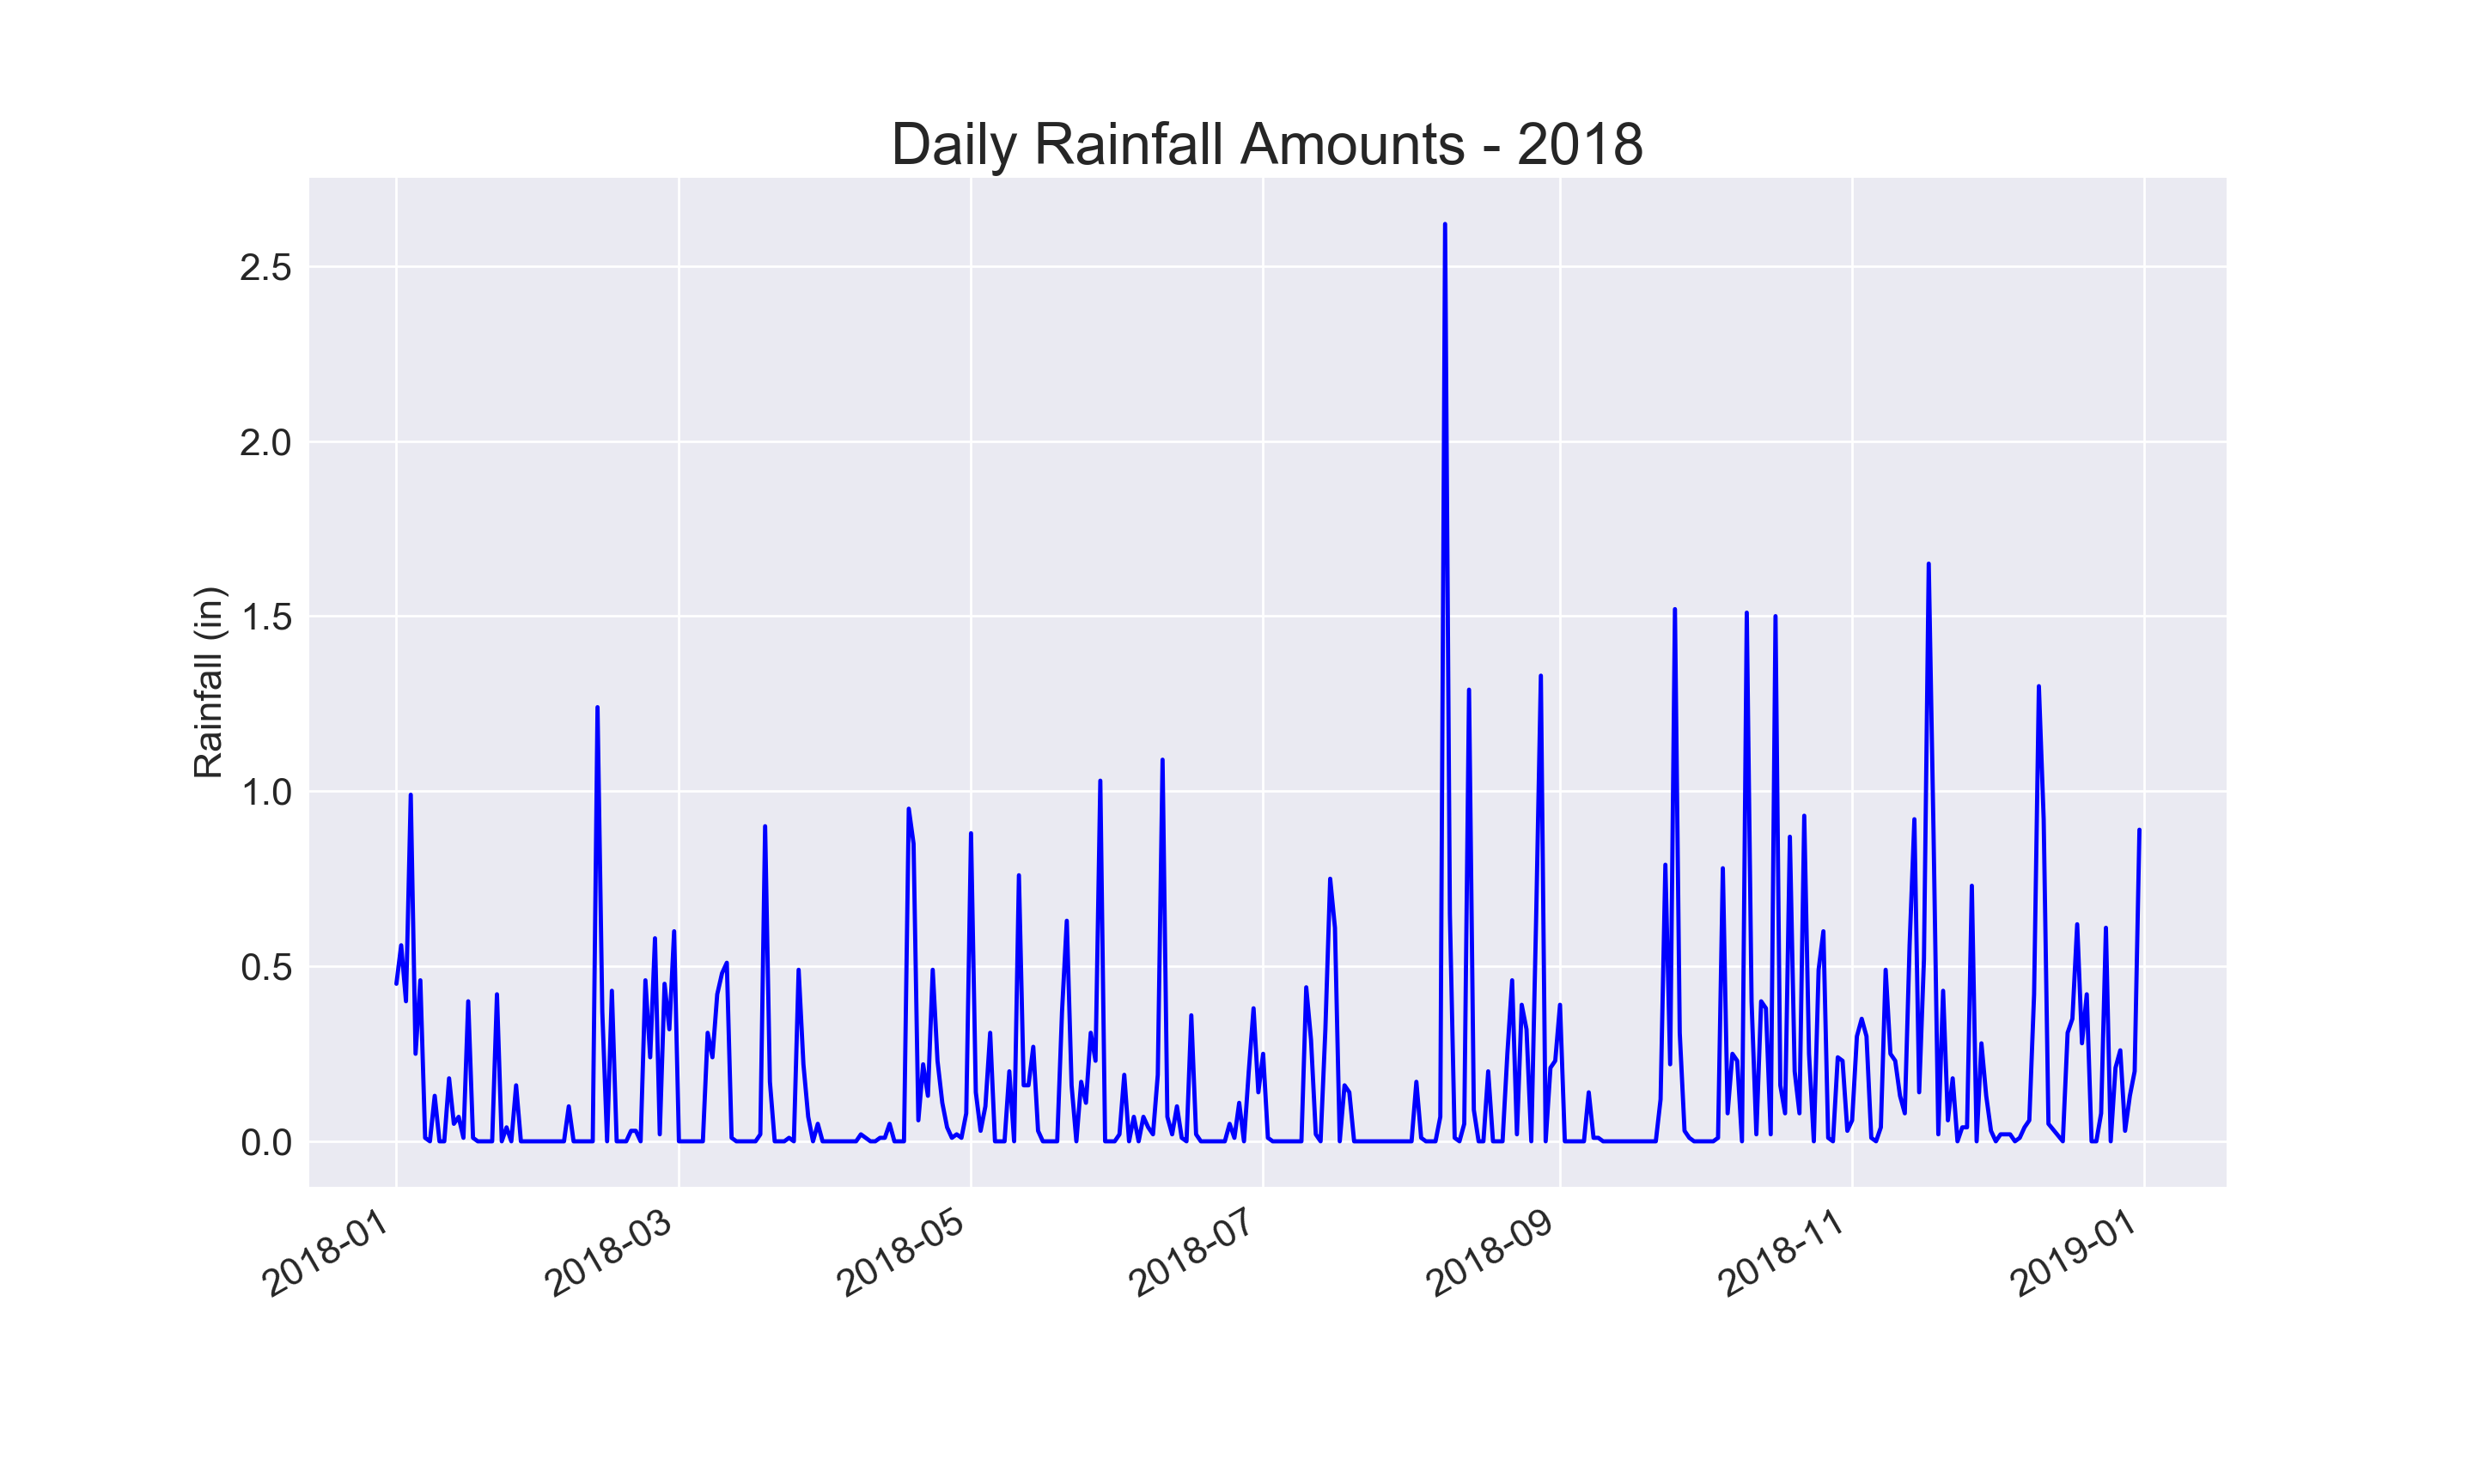 Daily rainfall for Sitka, Alaska in 2018